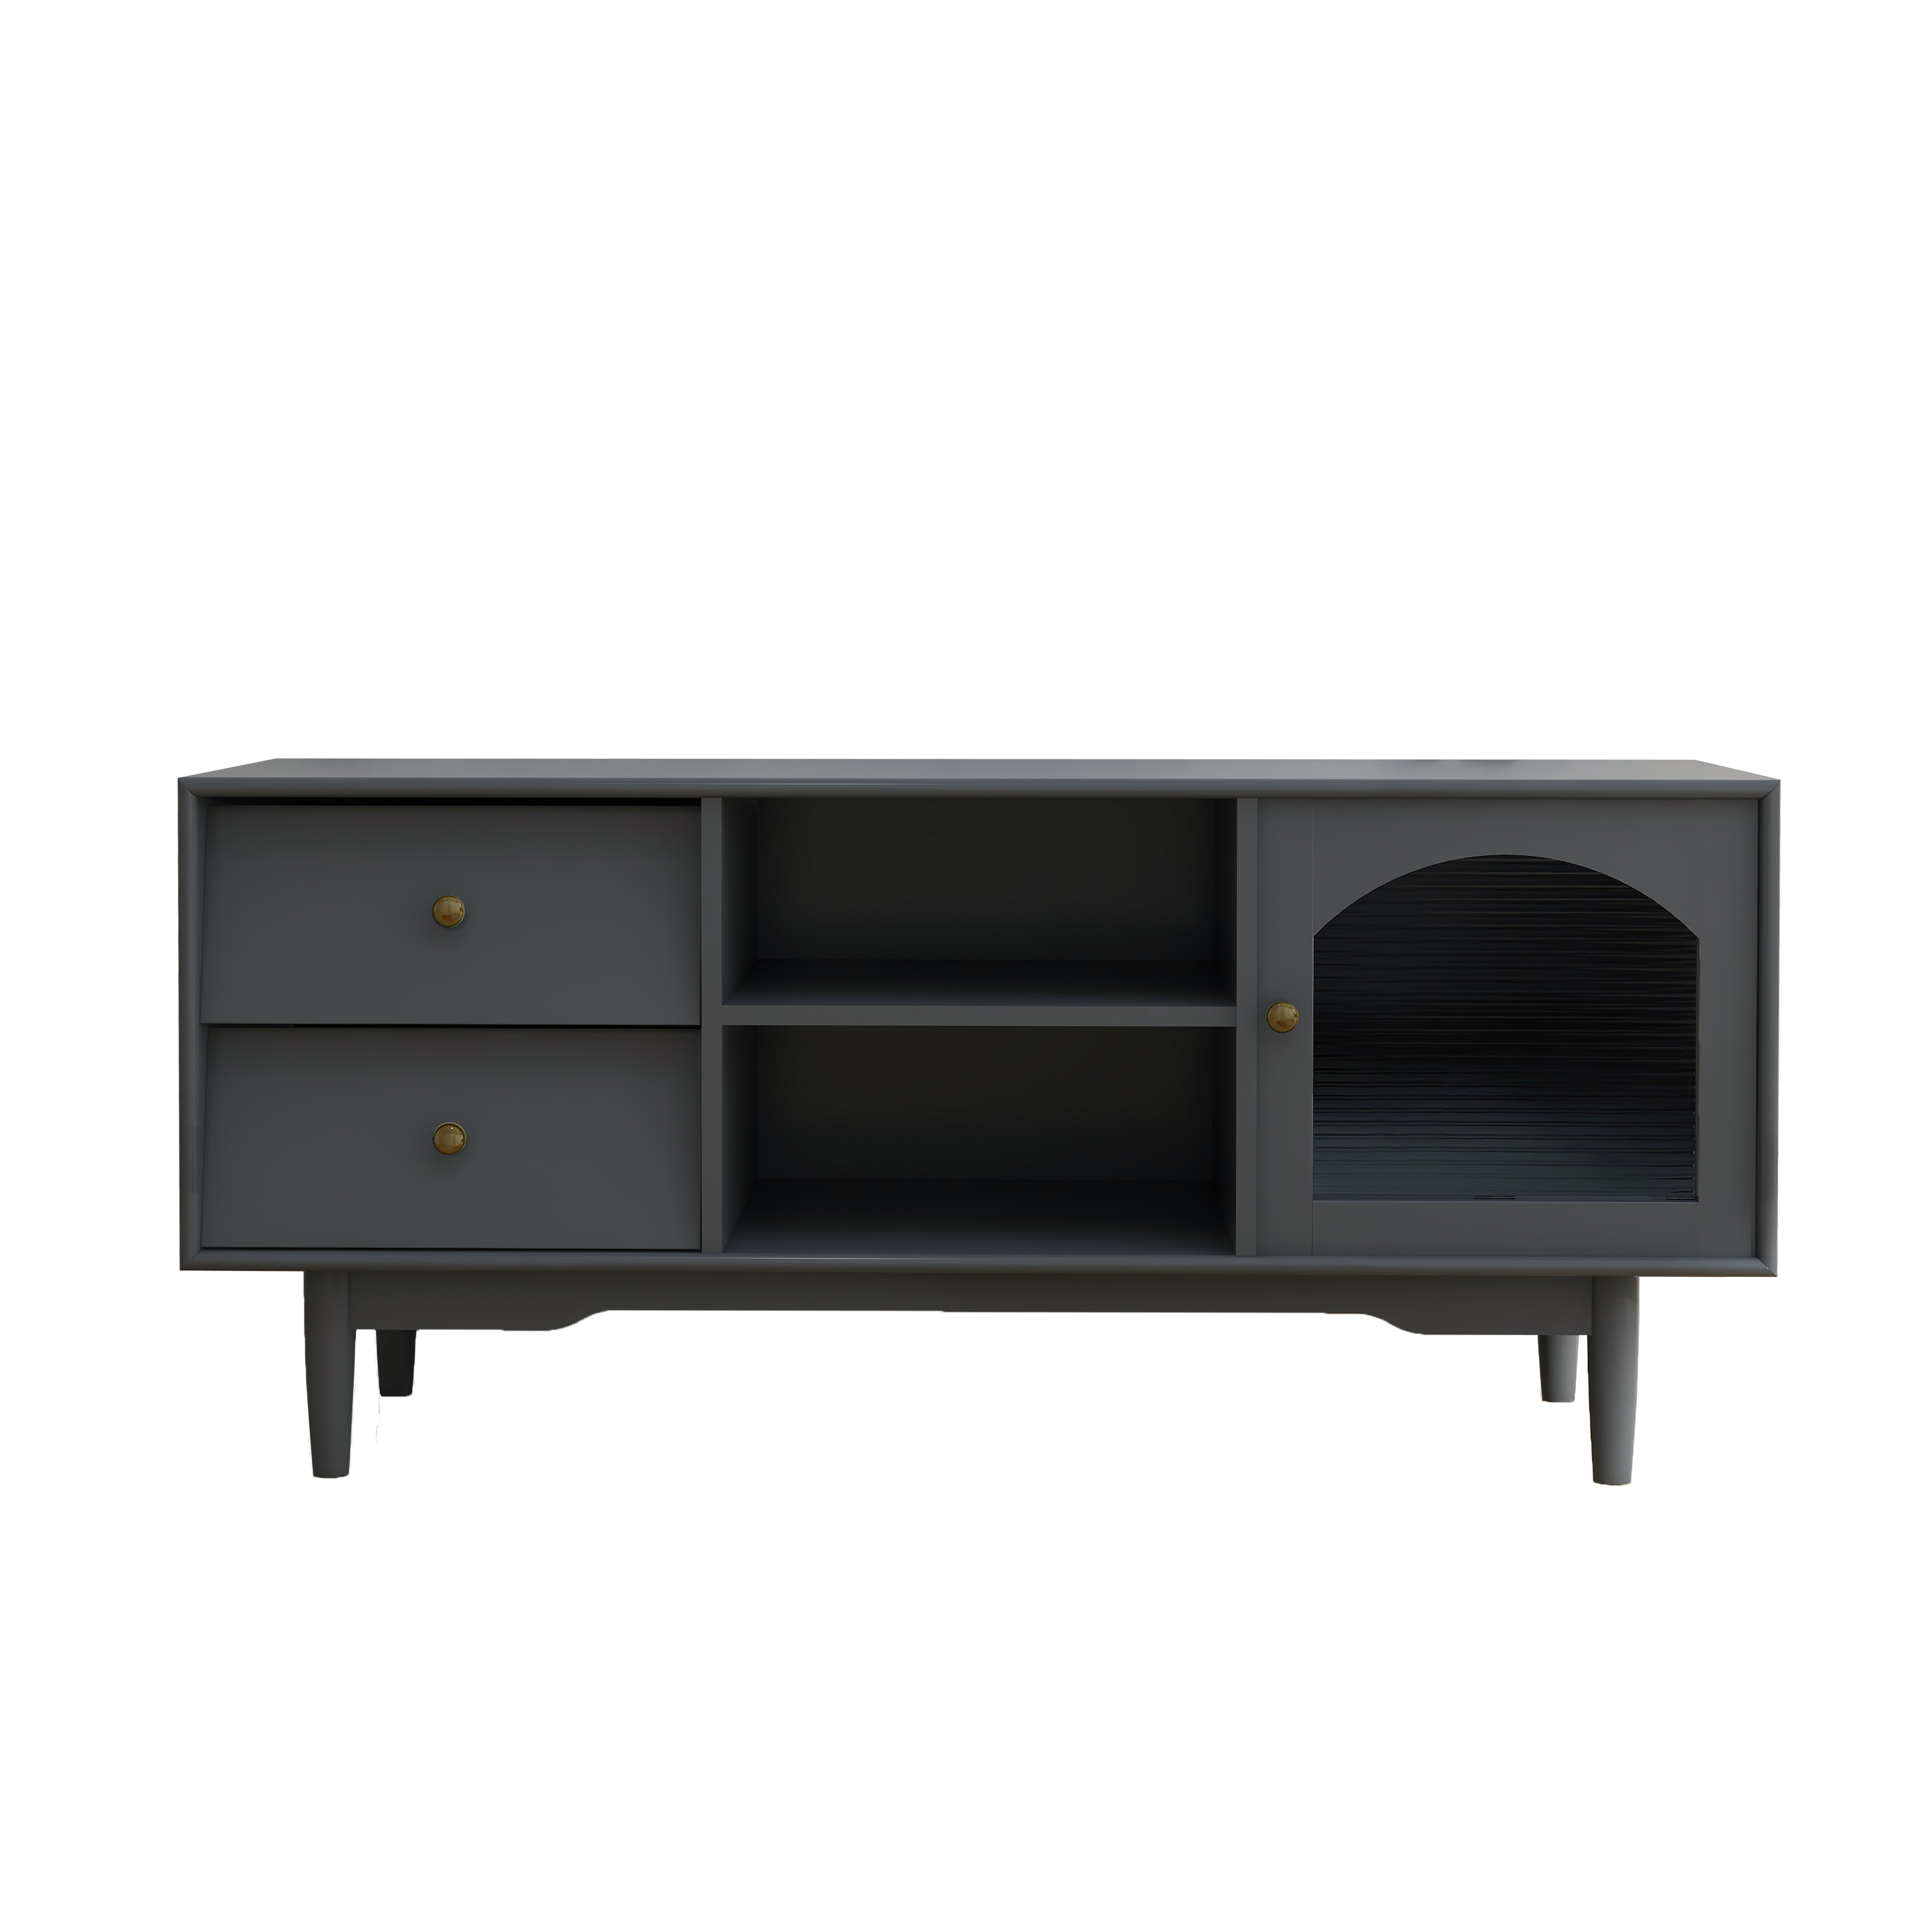 Living Room Grey color Tv cabinet with Drawers and open shelf, one cabinet storage space with glass door-Boyel Living